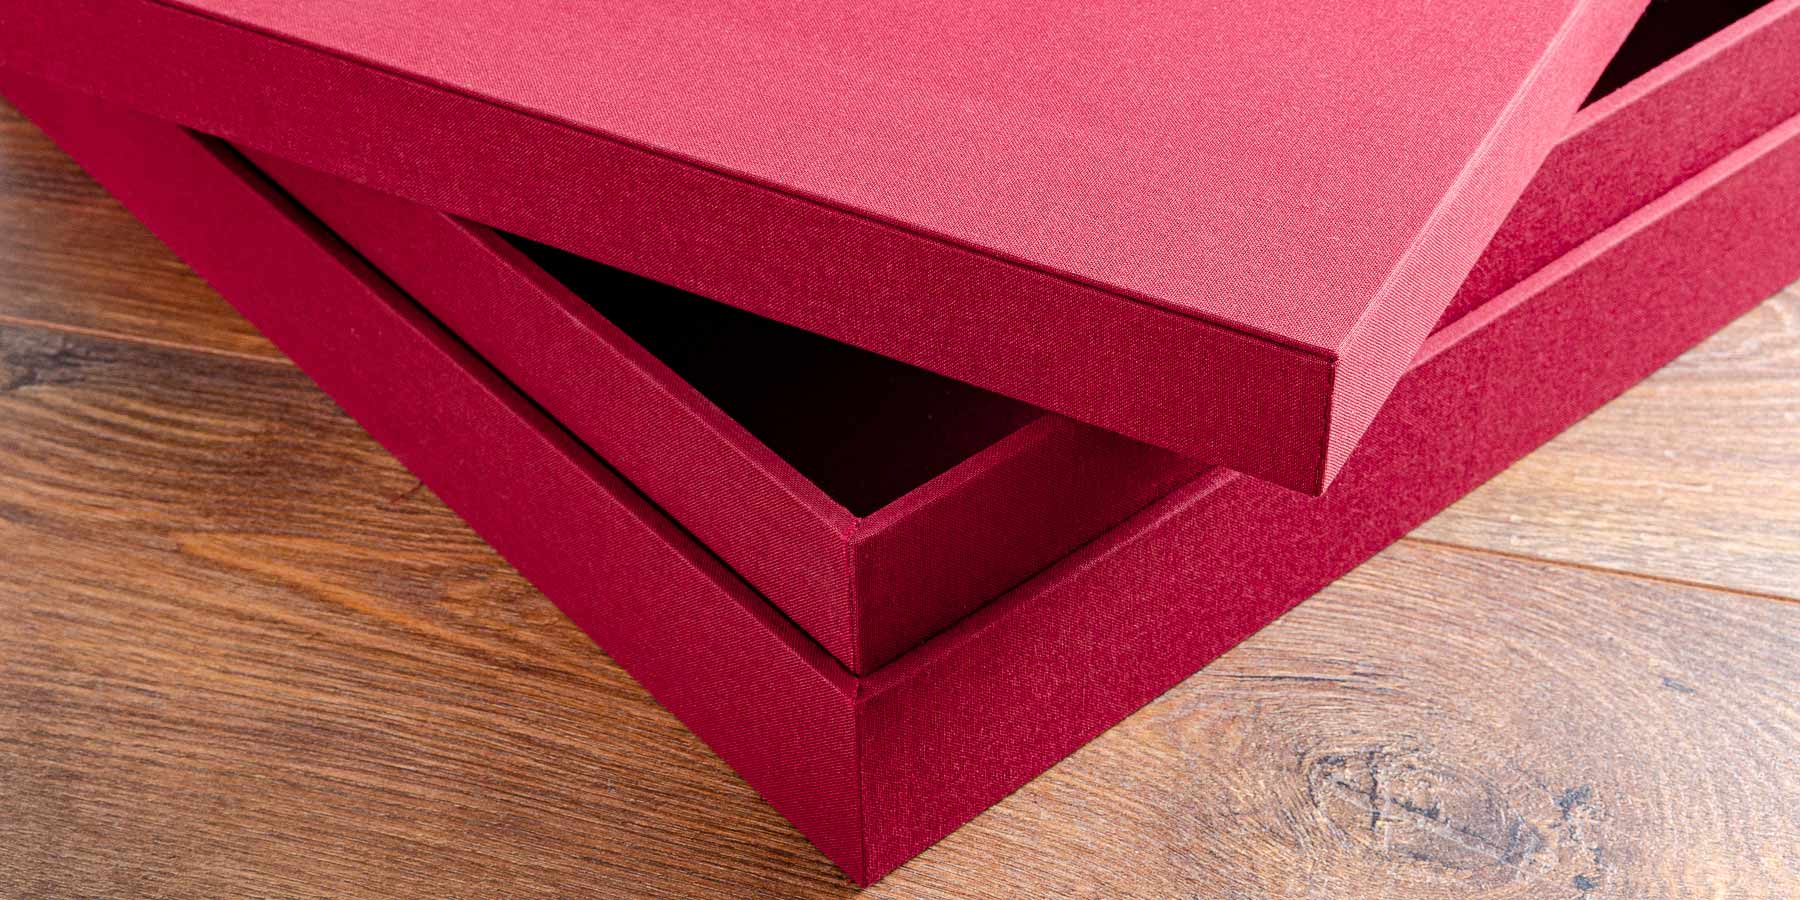 the attention to detail and strength that goes into making a custom presentation or keepsake box